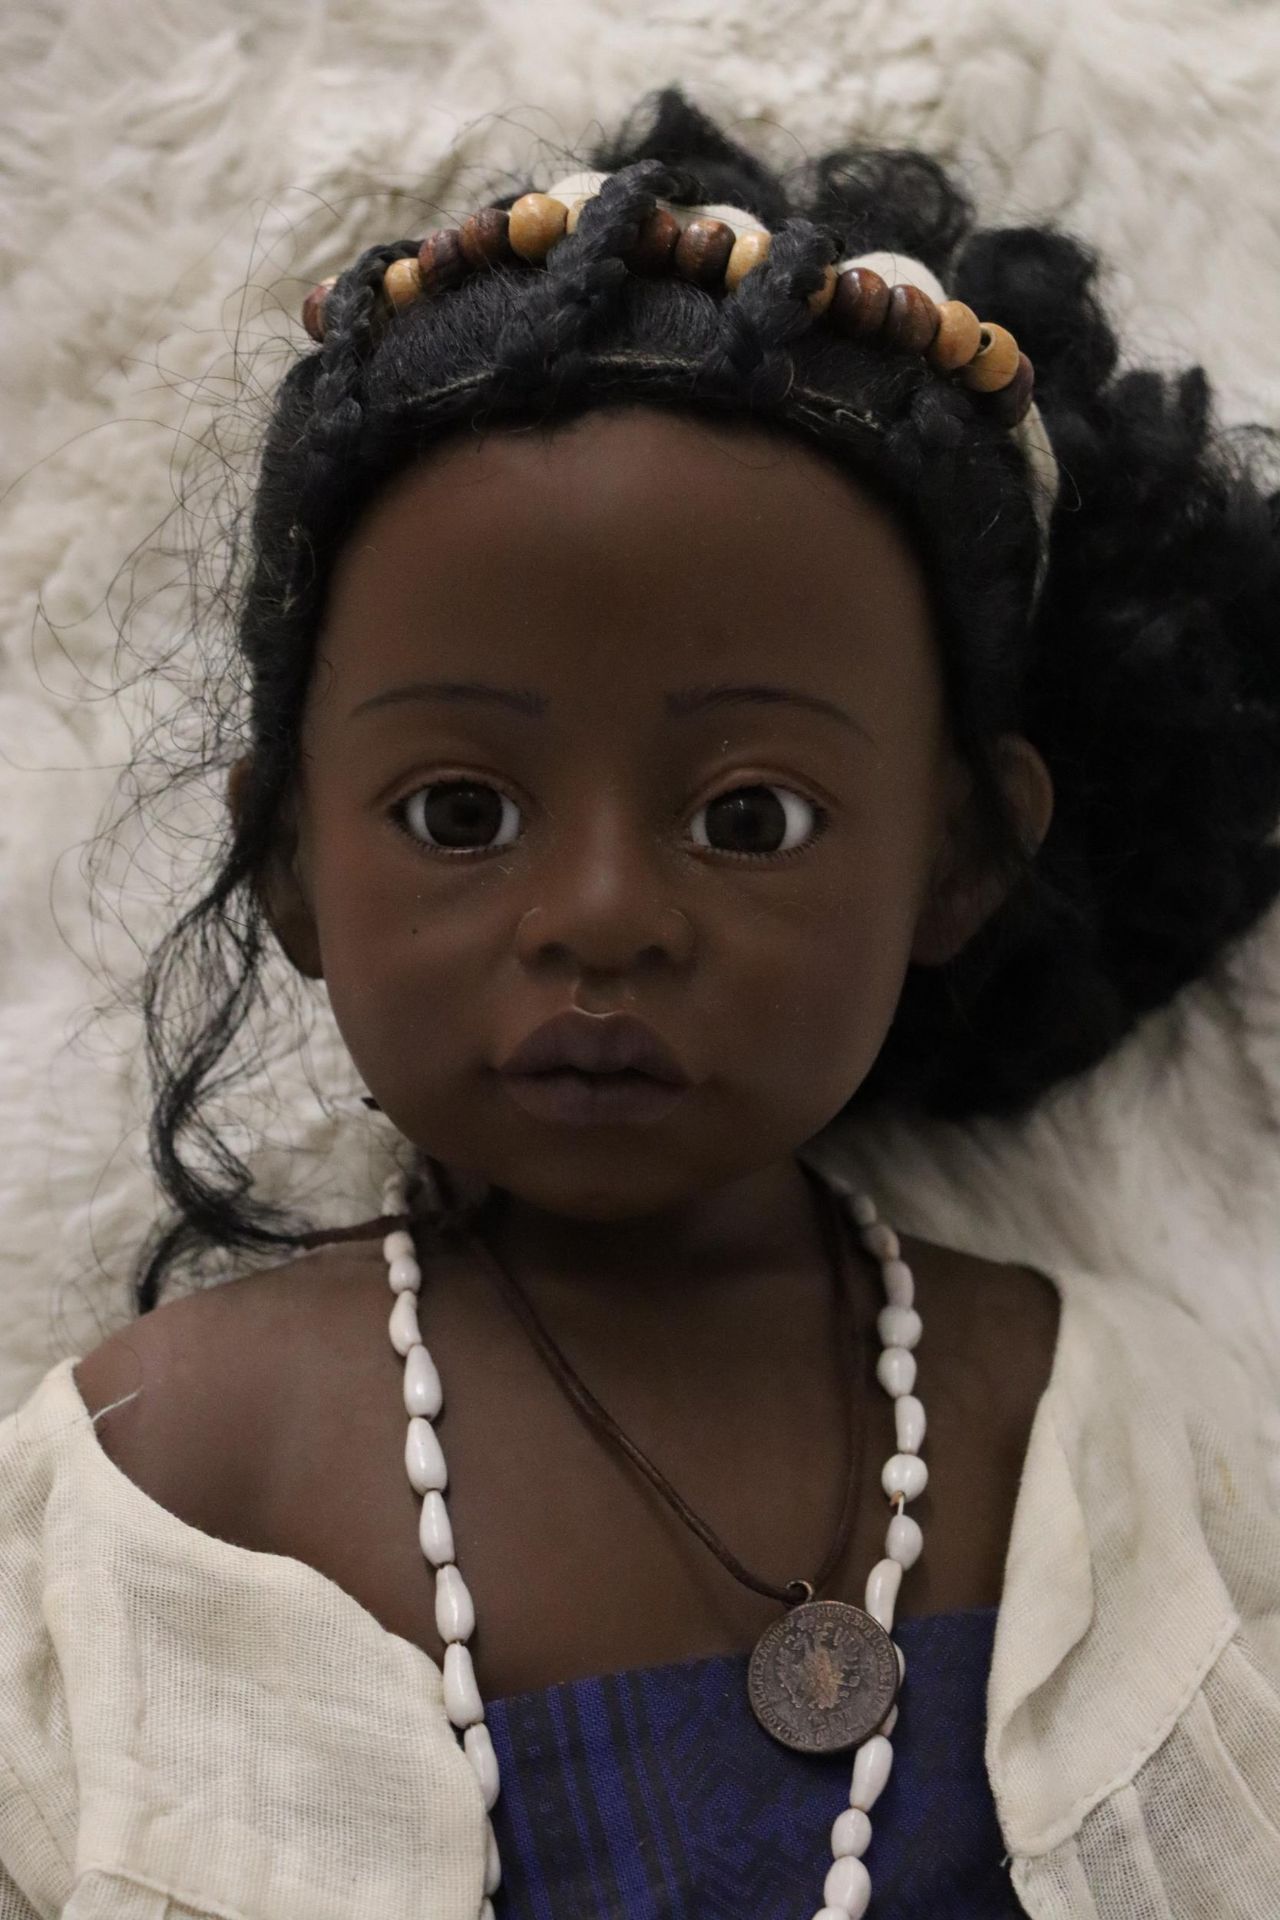 A GOTZ PSH 'PHILLIP HEATH' AFRICAN GIRL DOLL IN TRADITIONAL DRESS - Image 2 of 9